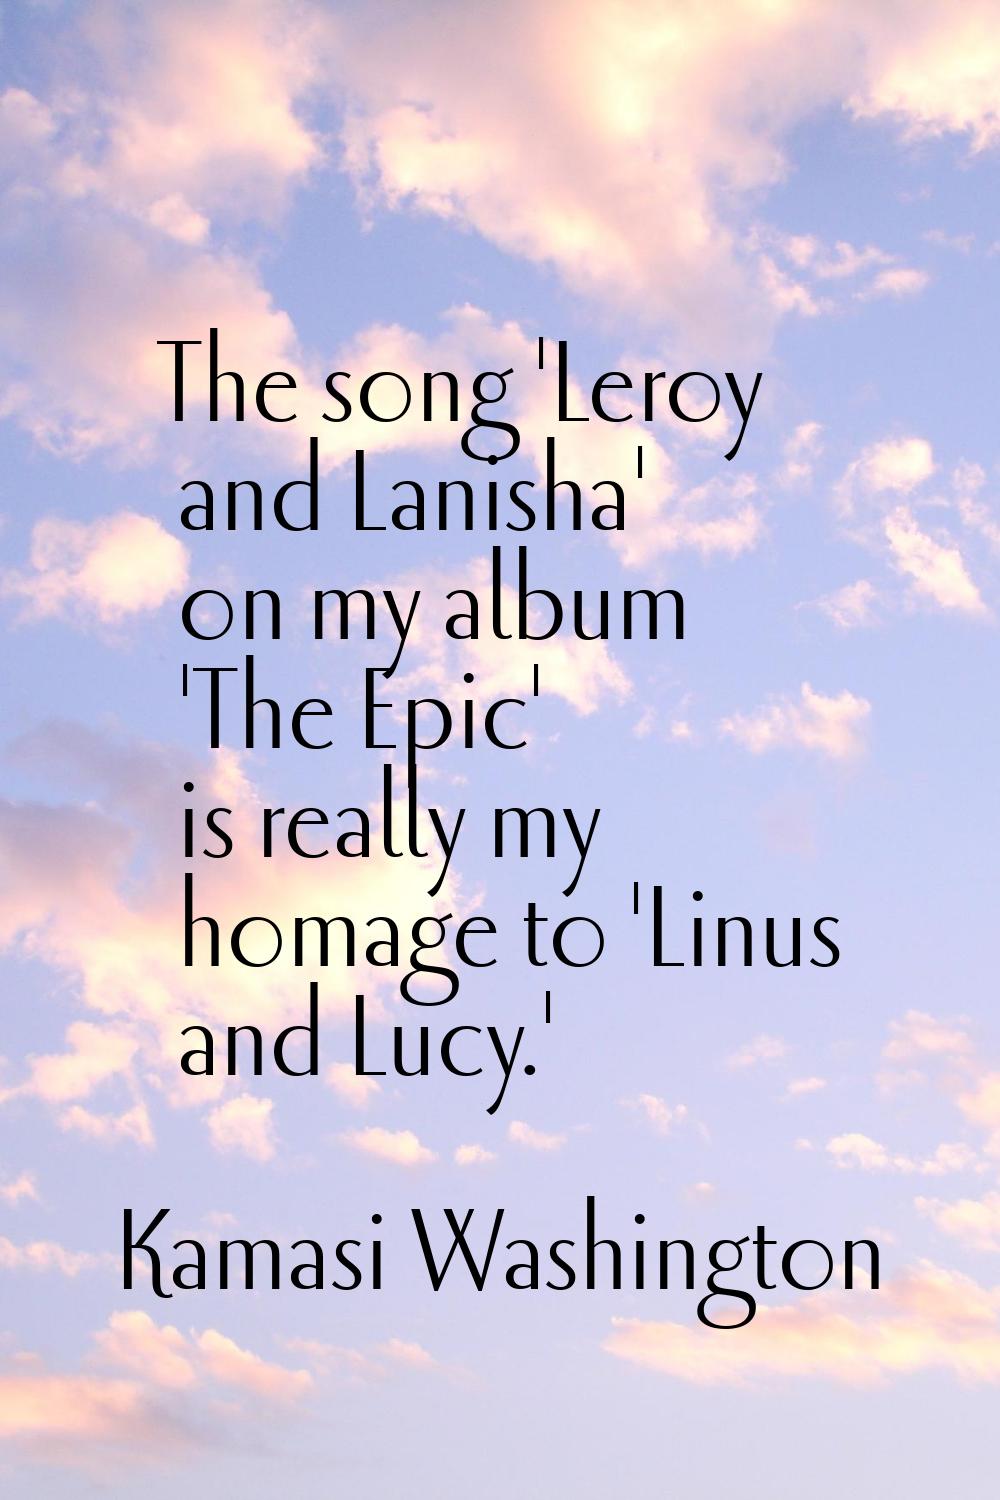 The song 'Leroy and Lanisha' on my album 'The Epic' is really my homage to 'Linus and Lucy.'